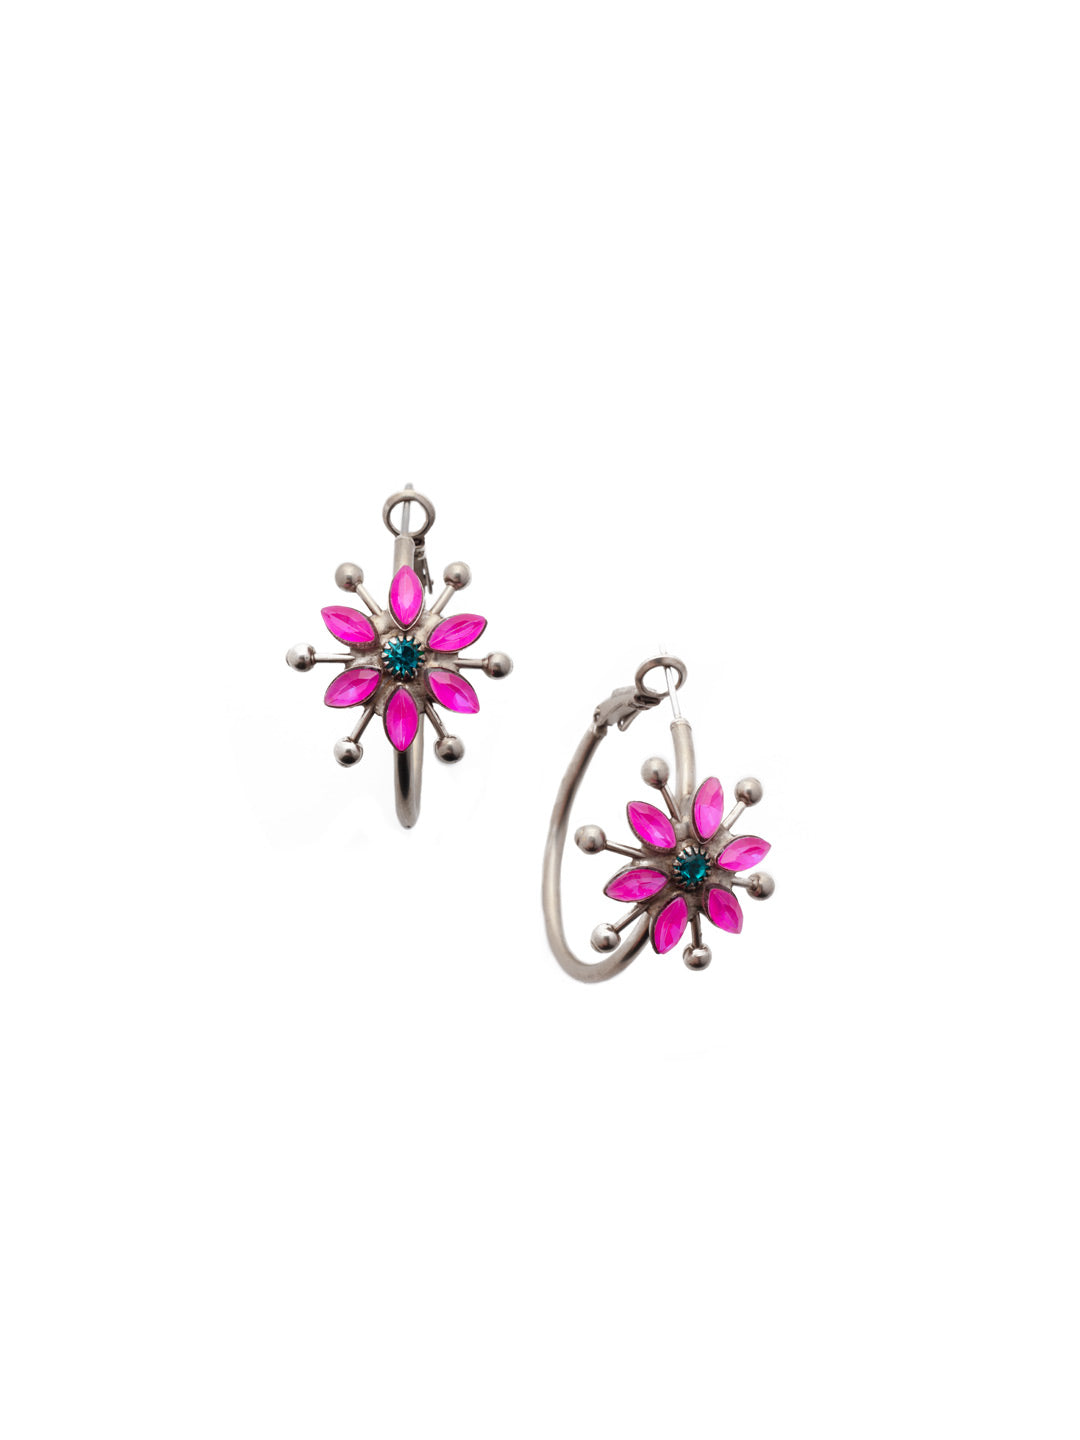 Selene Hoop Earrings - EEV9ASWDW - <p>The Selene Crystal Hoop Earrings are the perfect pair for floral fans. The statement floral piece on each is crafted from shining metal and navette crystals, too. From Sorrelli's Wild Watermelon collection in our Antique Silver-tone finish.</p>